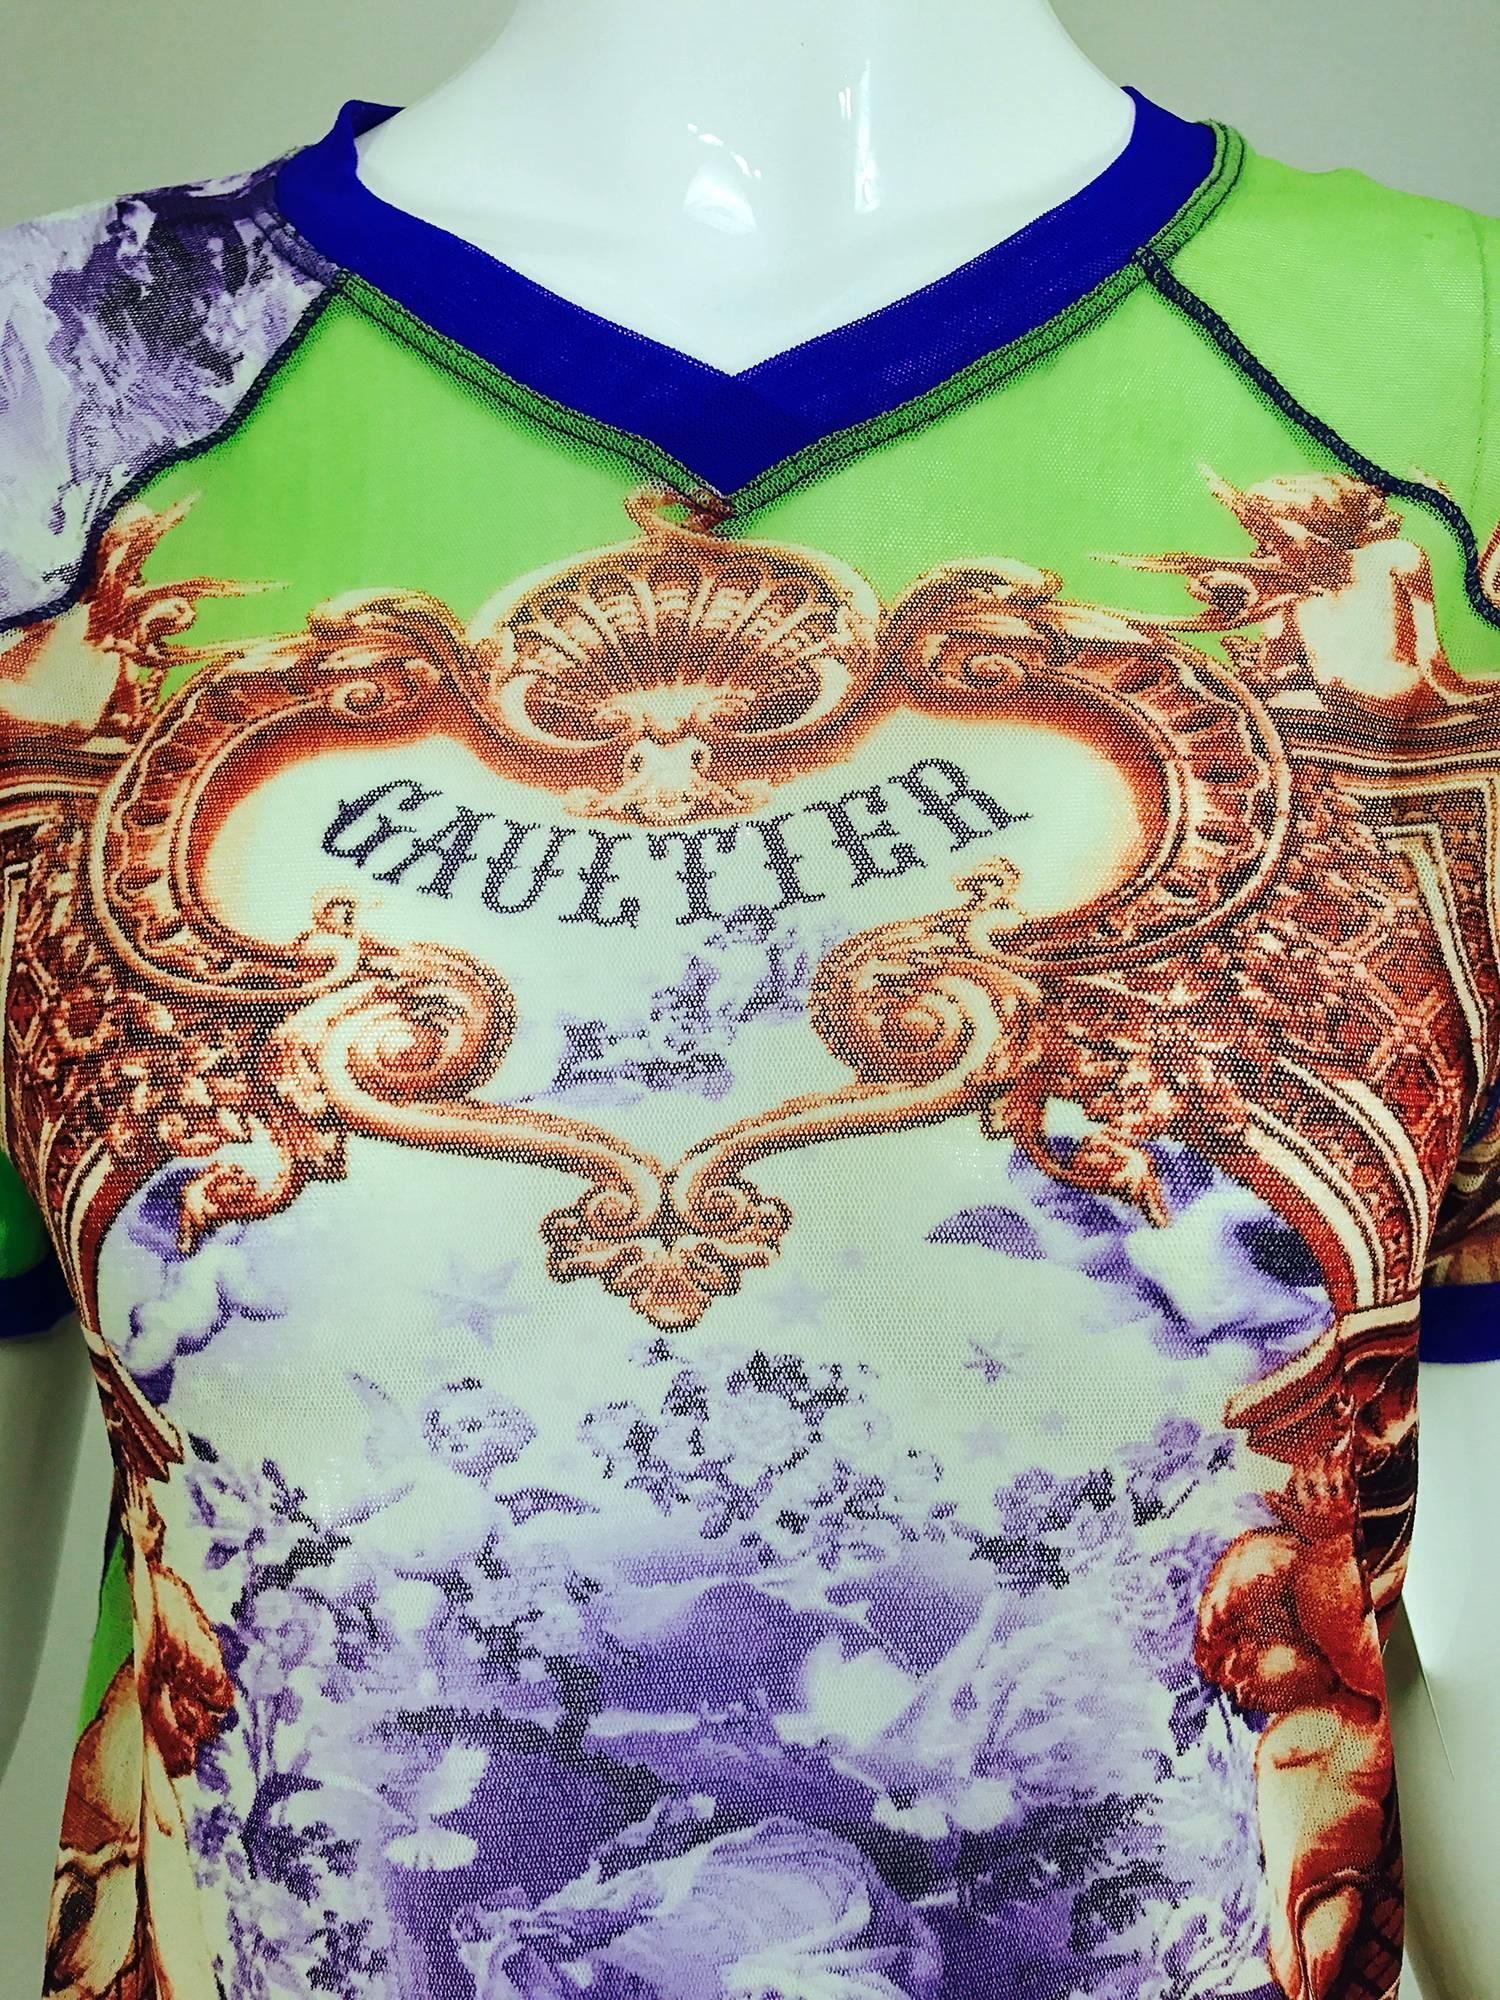 Jean Paul Gaultier colourful mesh top, V neckline, short raglan sleeves, fitted and stretchy. Fits a size S-M. Great graphics!

In excellent wearable condition... All our clothing is dry cleaned and inspected for condition and is ready to wear...Any